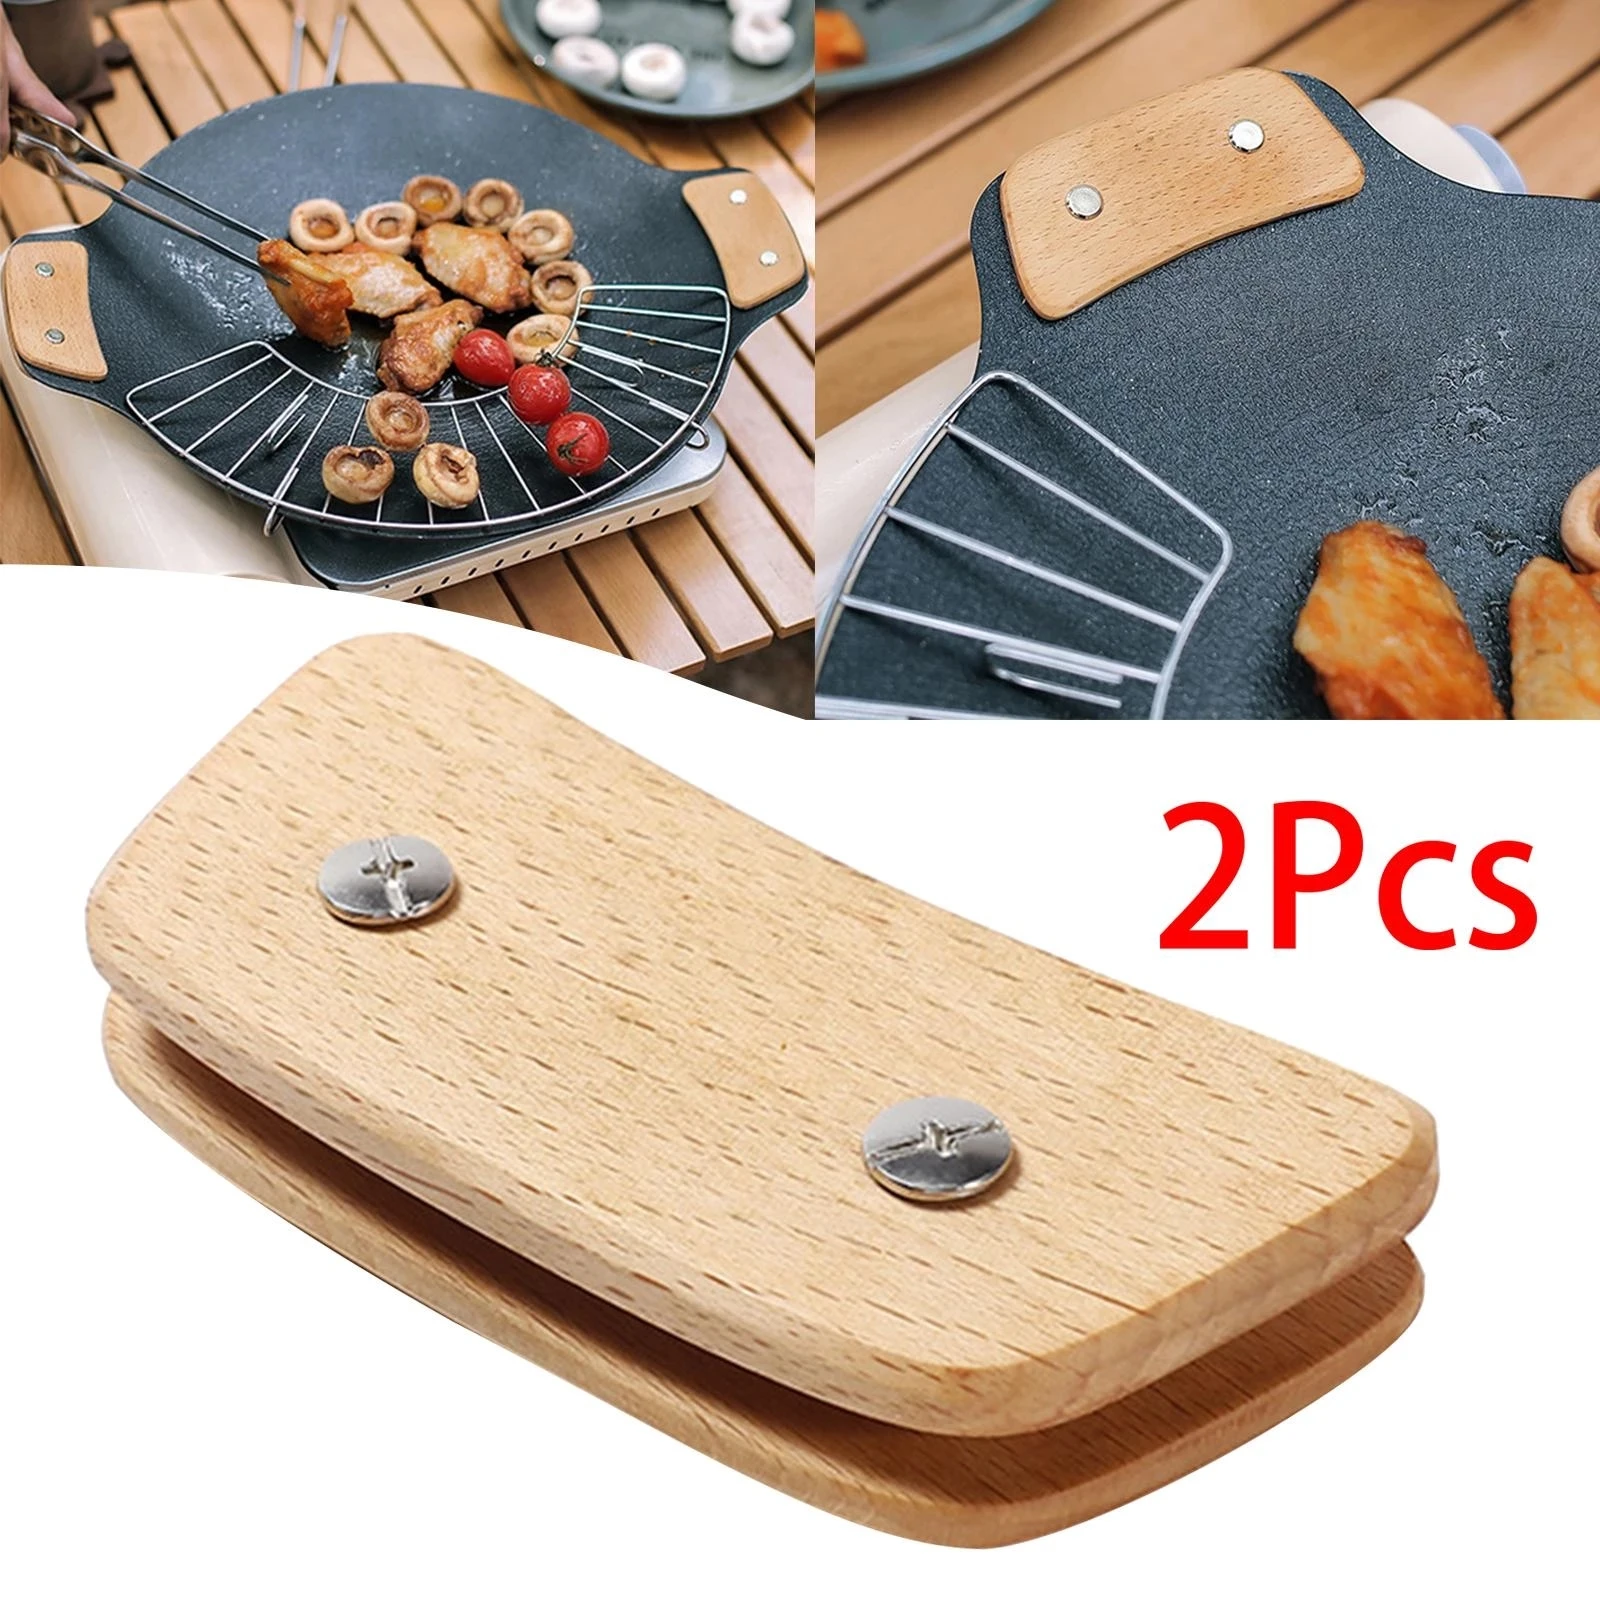 

Outdoor Wooden BBQ Pan Handle Anti Scald Heat Resistant Insulated Grip Replacement for Sauce Grill Pan Griddle Camping